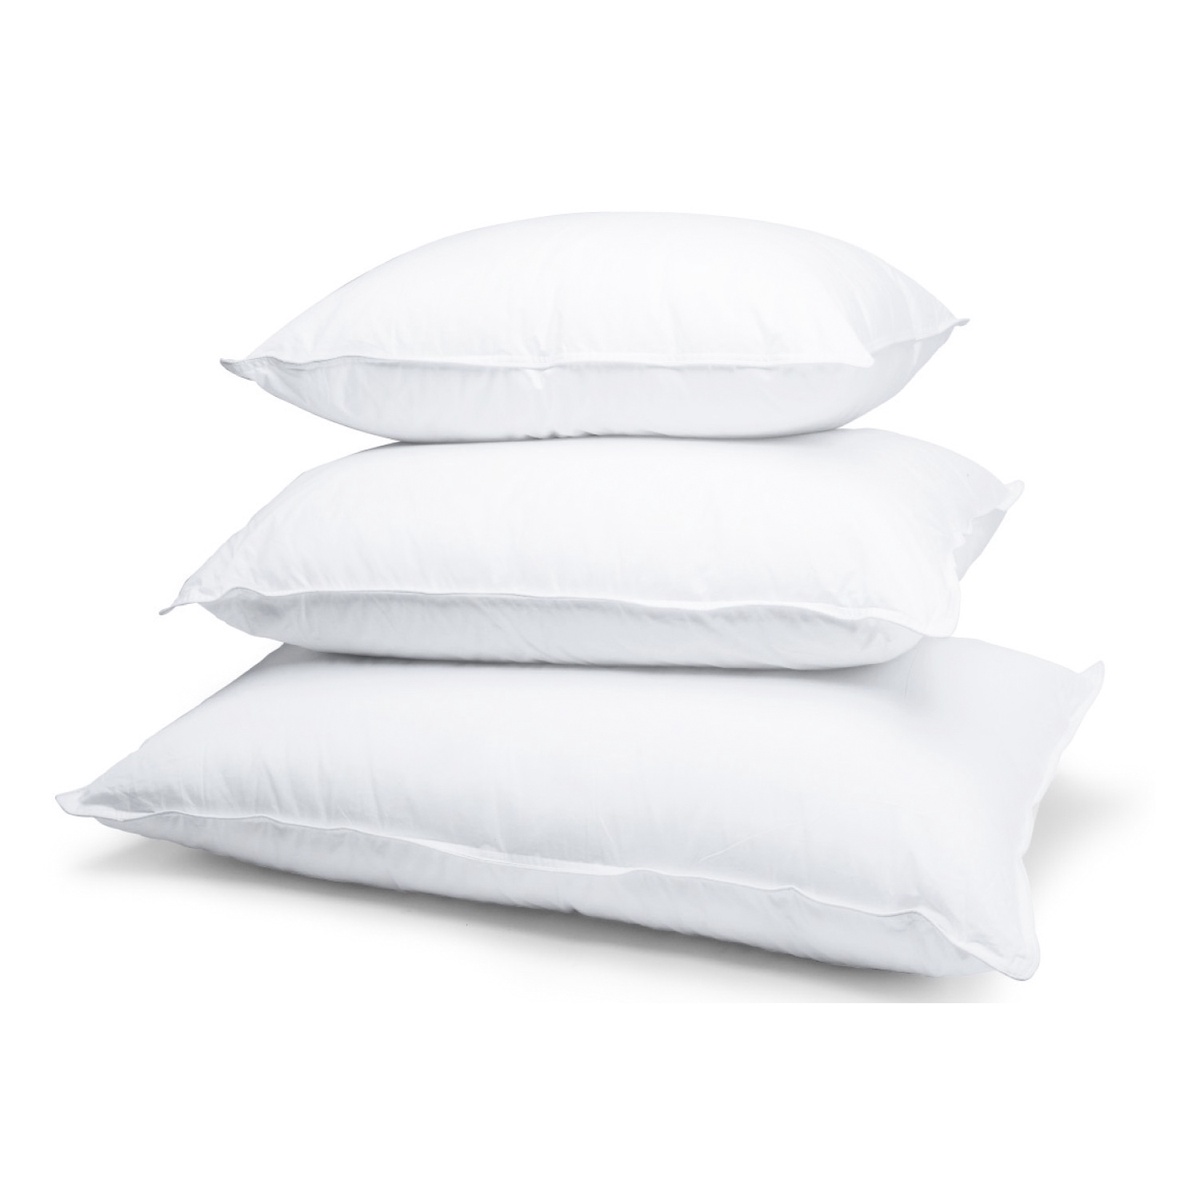 How Can I Ensure That the Pillow I Choose Aligns with My Sleeping Position?